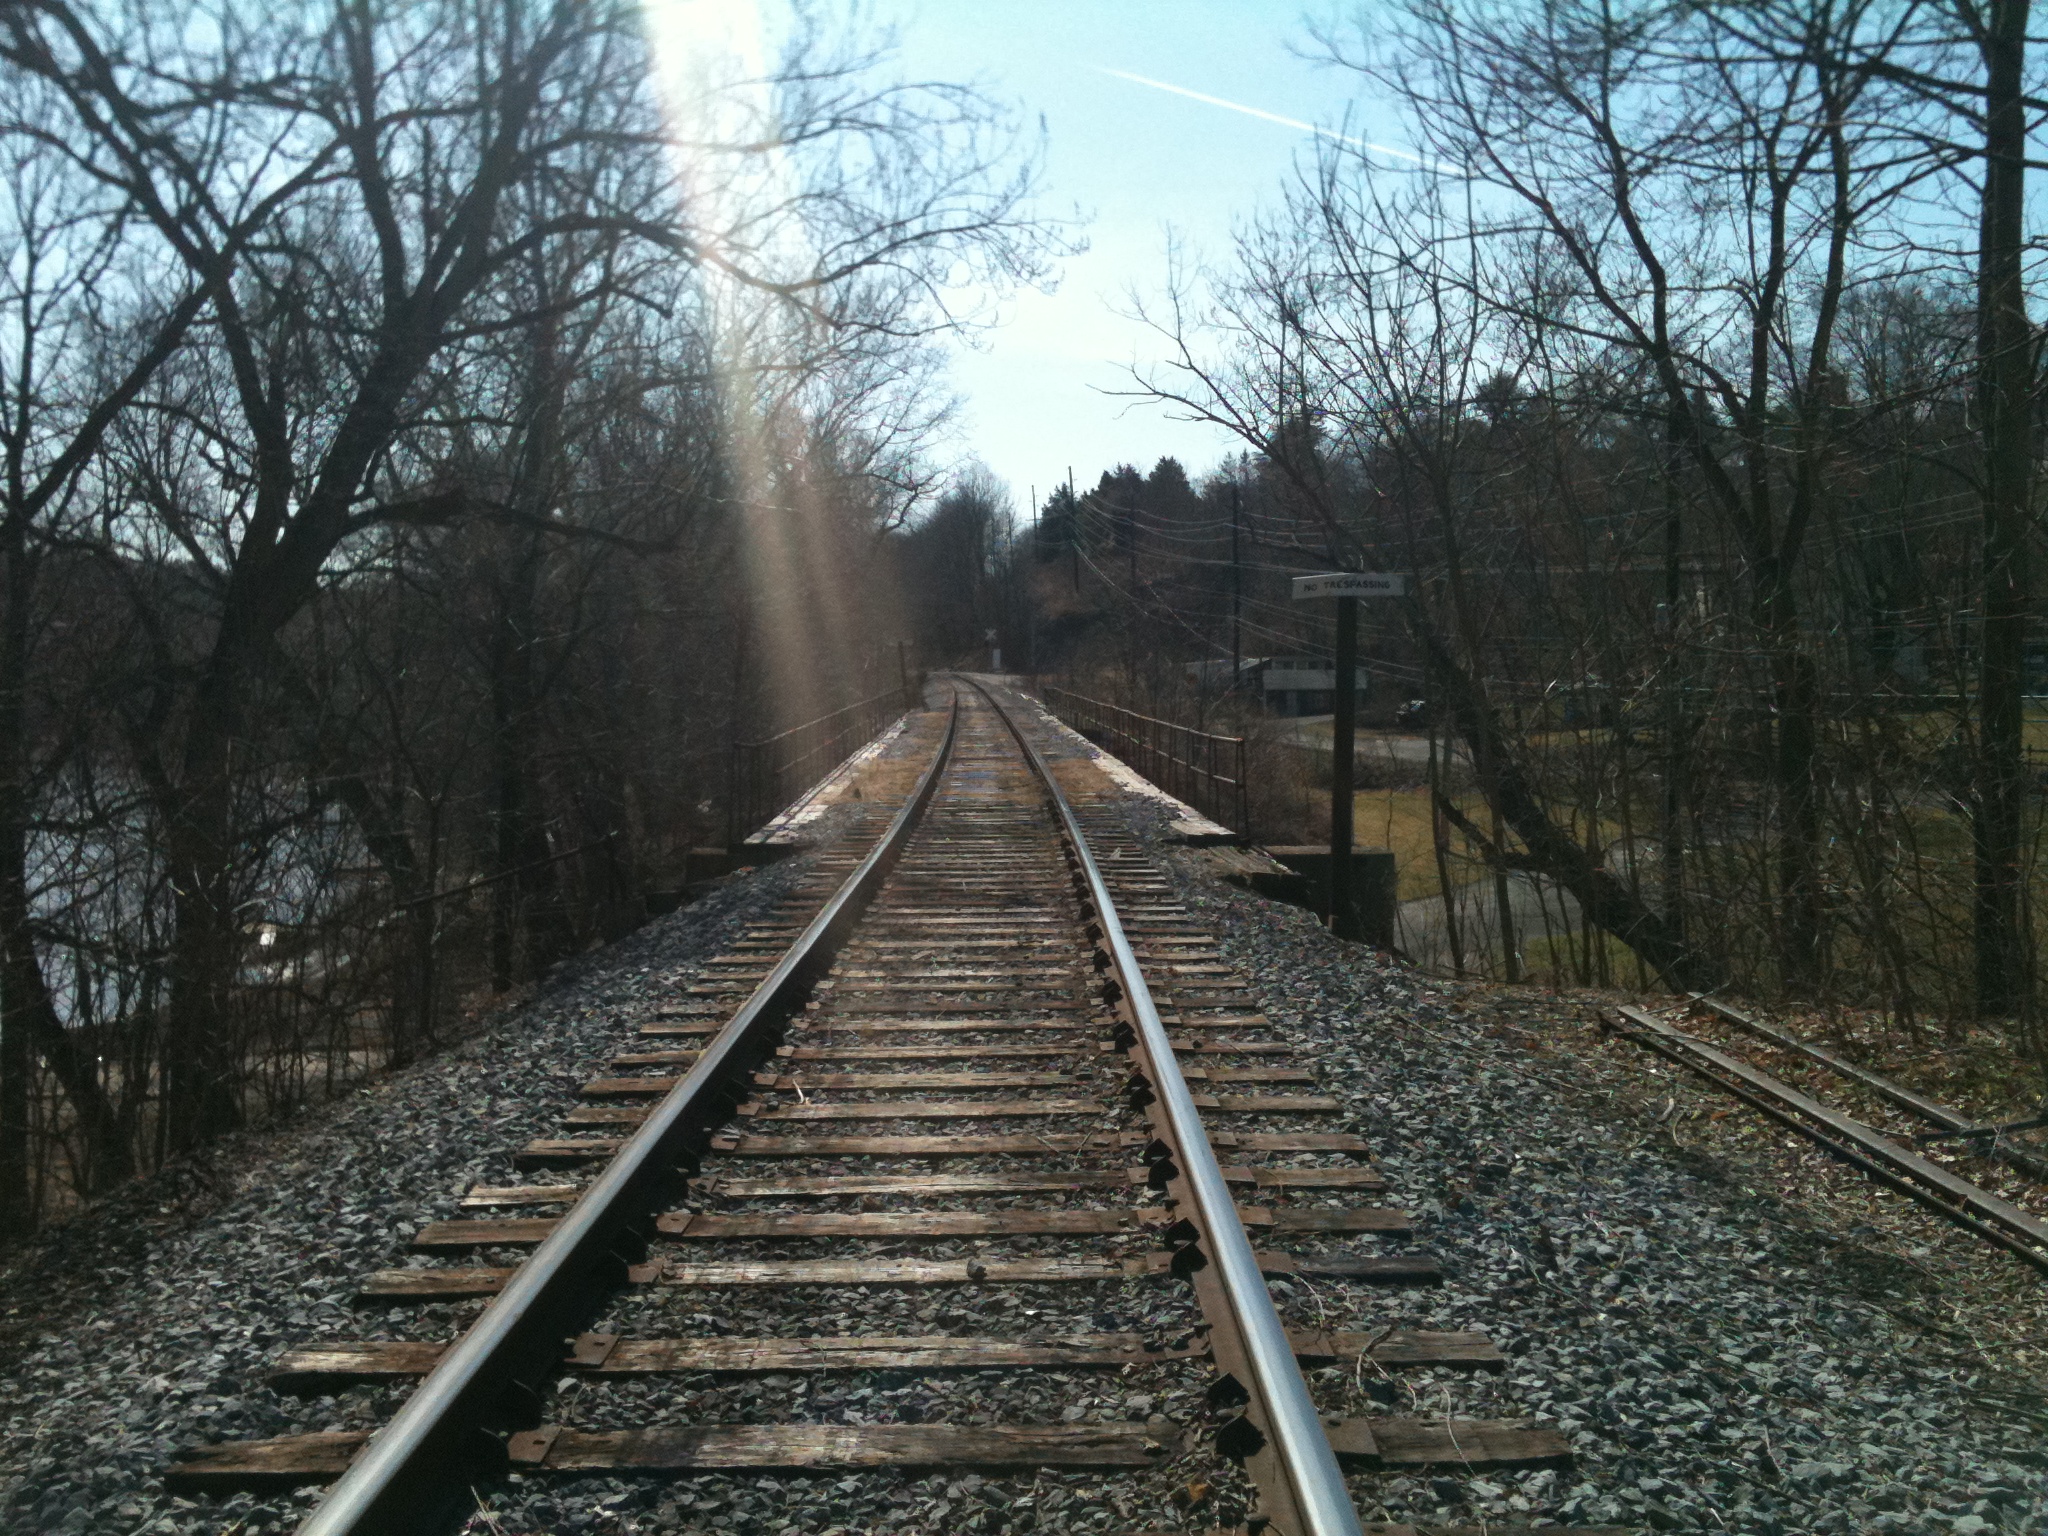 Looking South from the Train Tracks